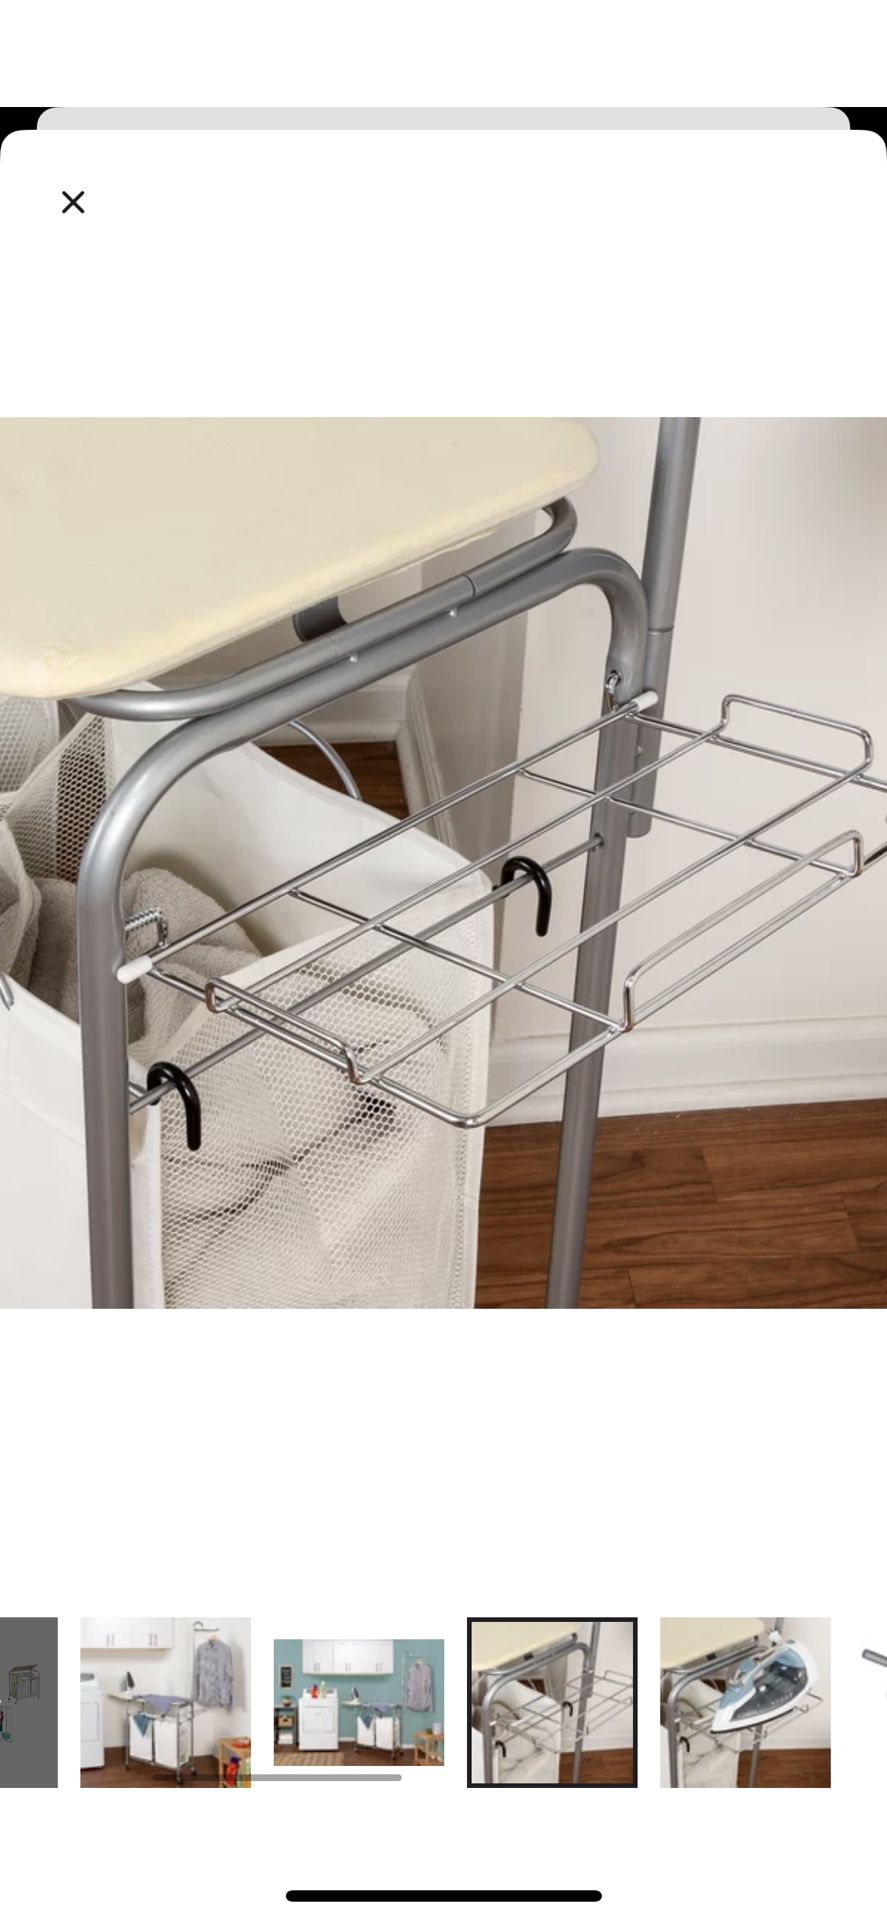 Laundry Sorter Ironing Board And Steam Rack